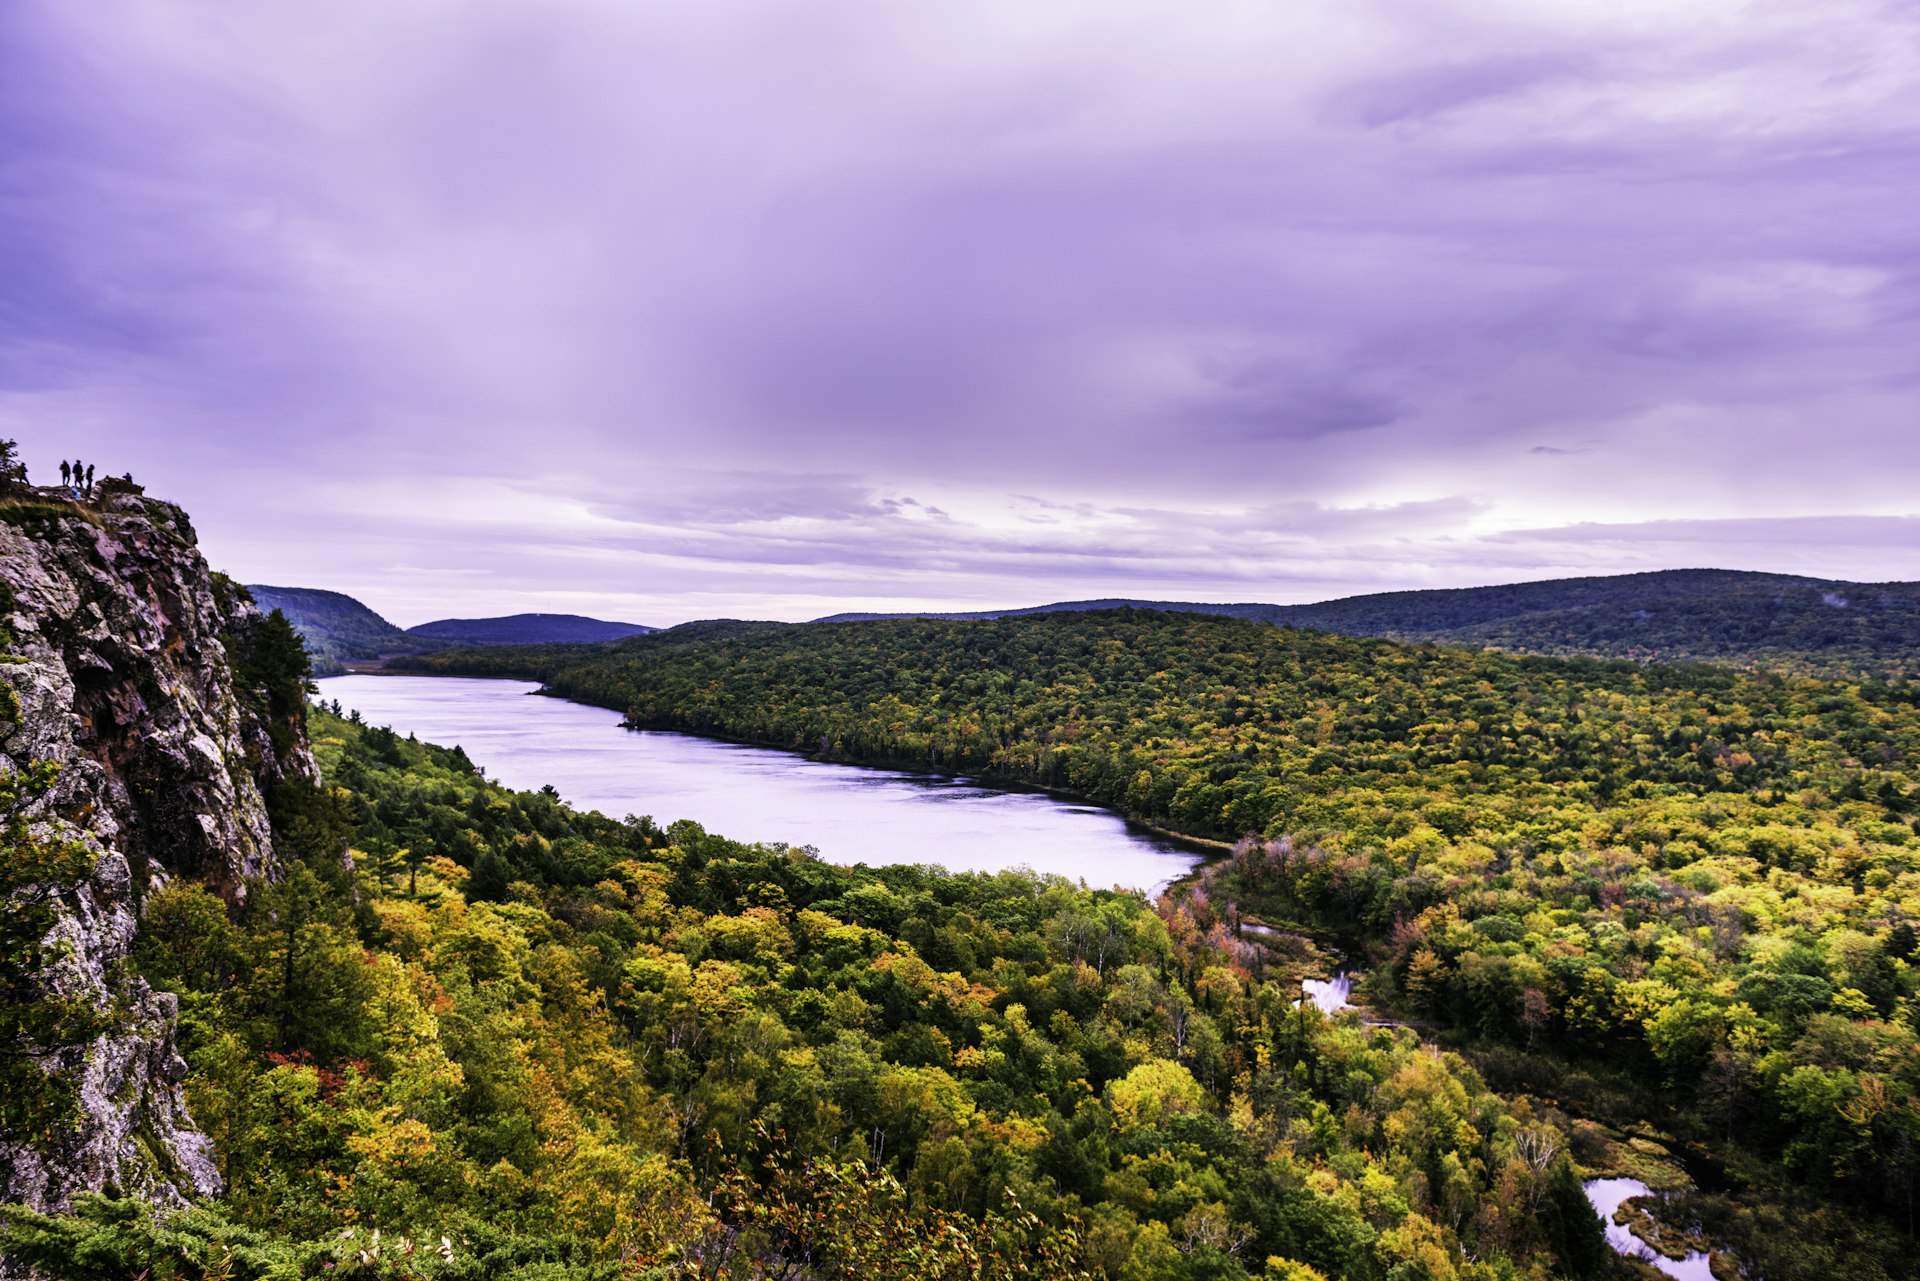 A viewpoint over a lake surrounded by woodland. A small group of hikers stand to the left on a rocky outcrop